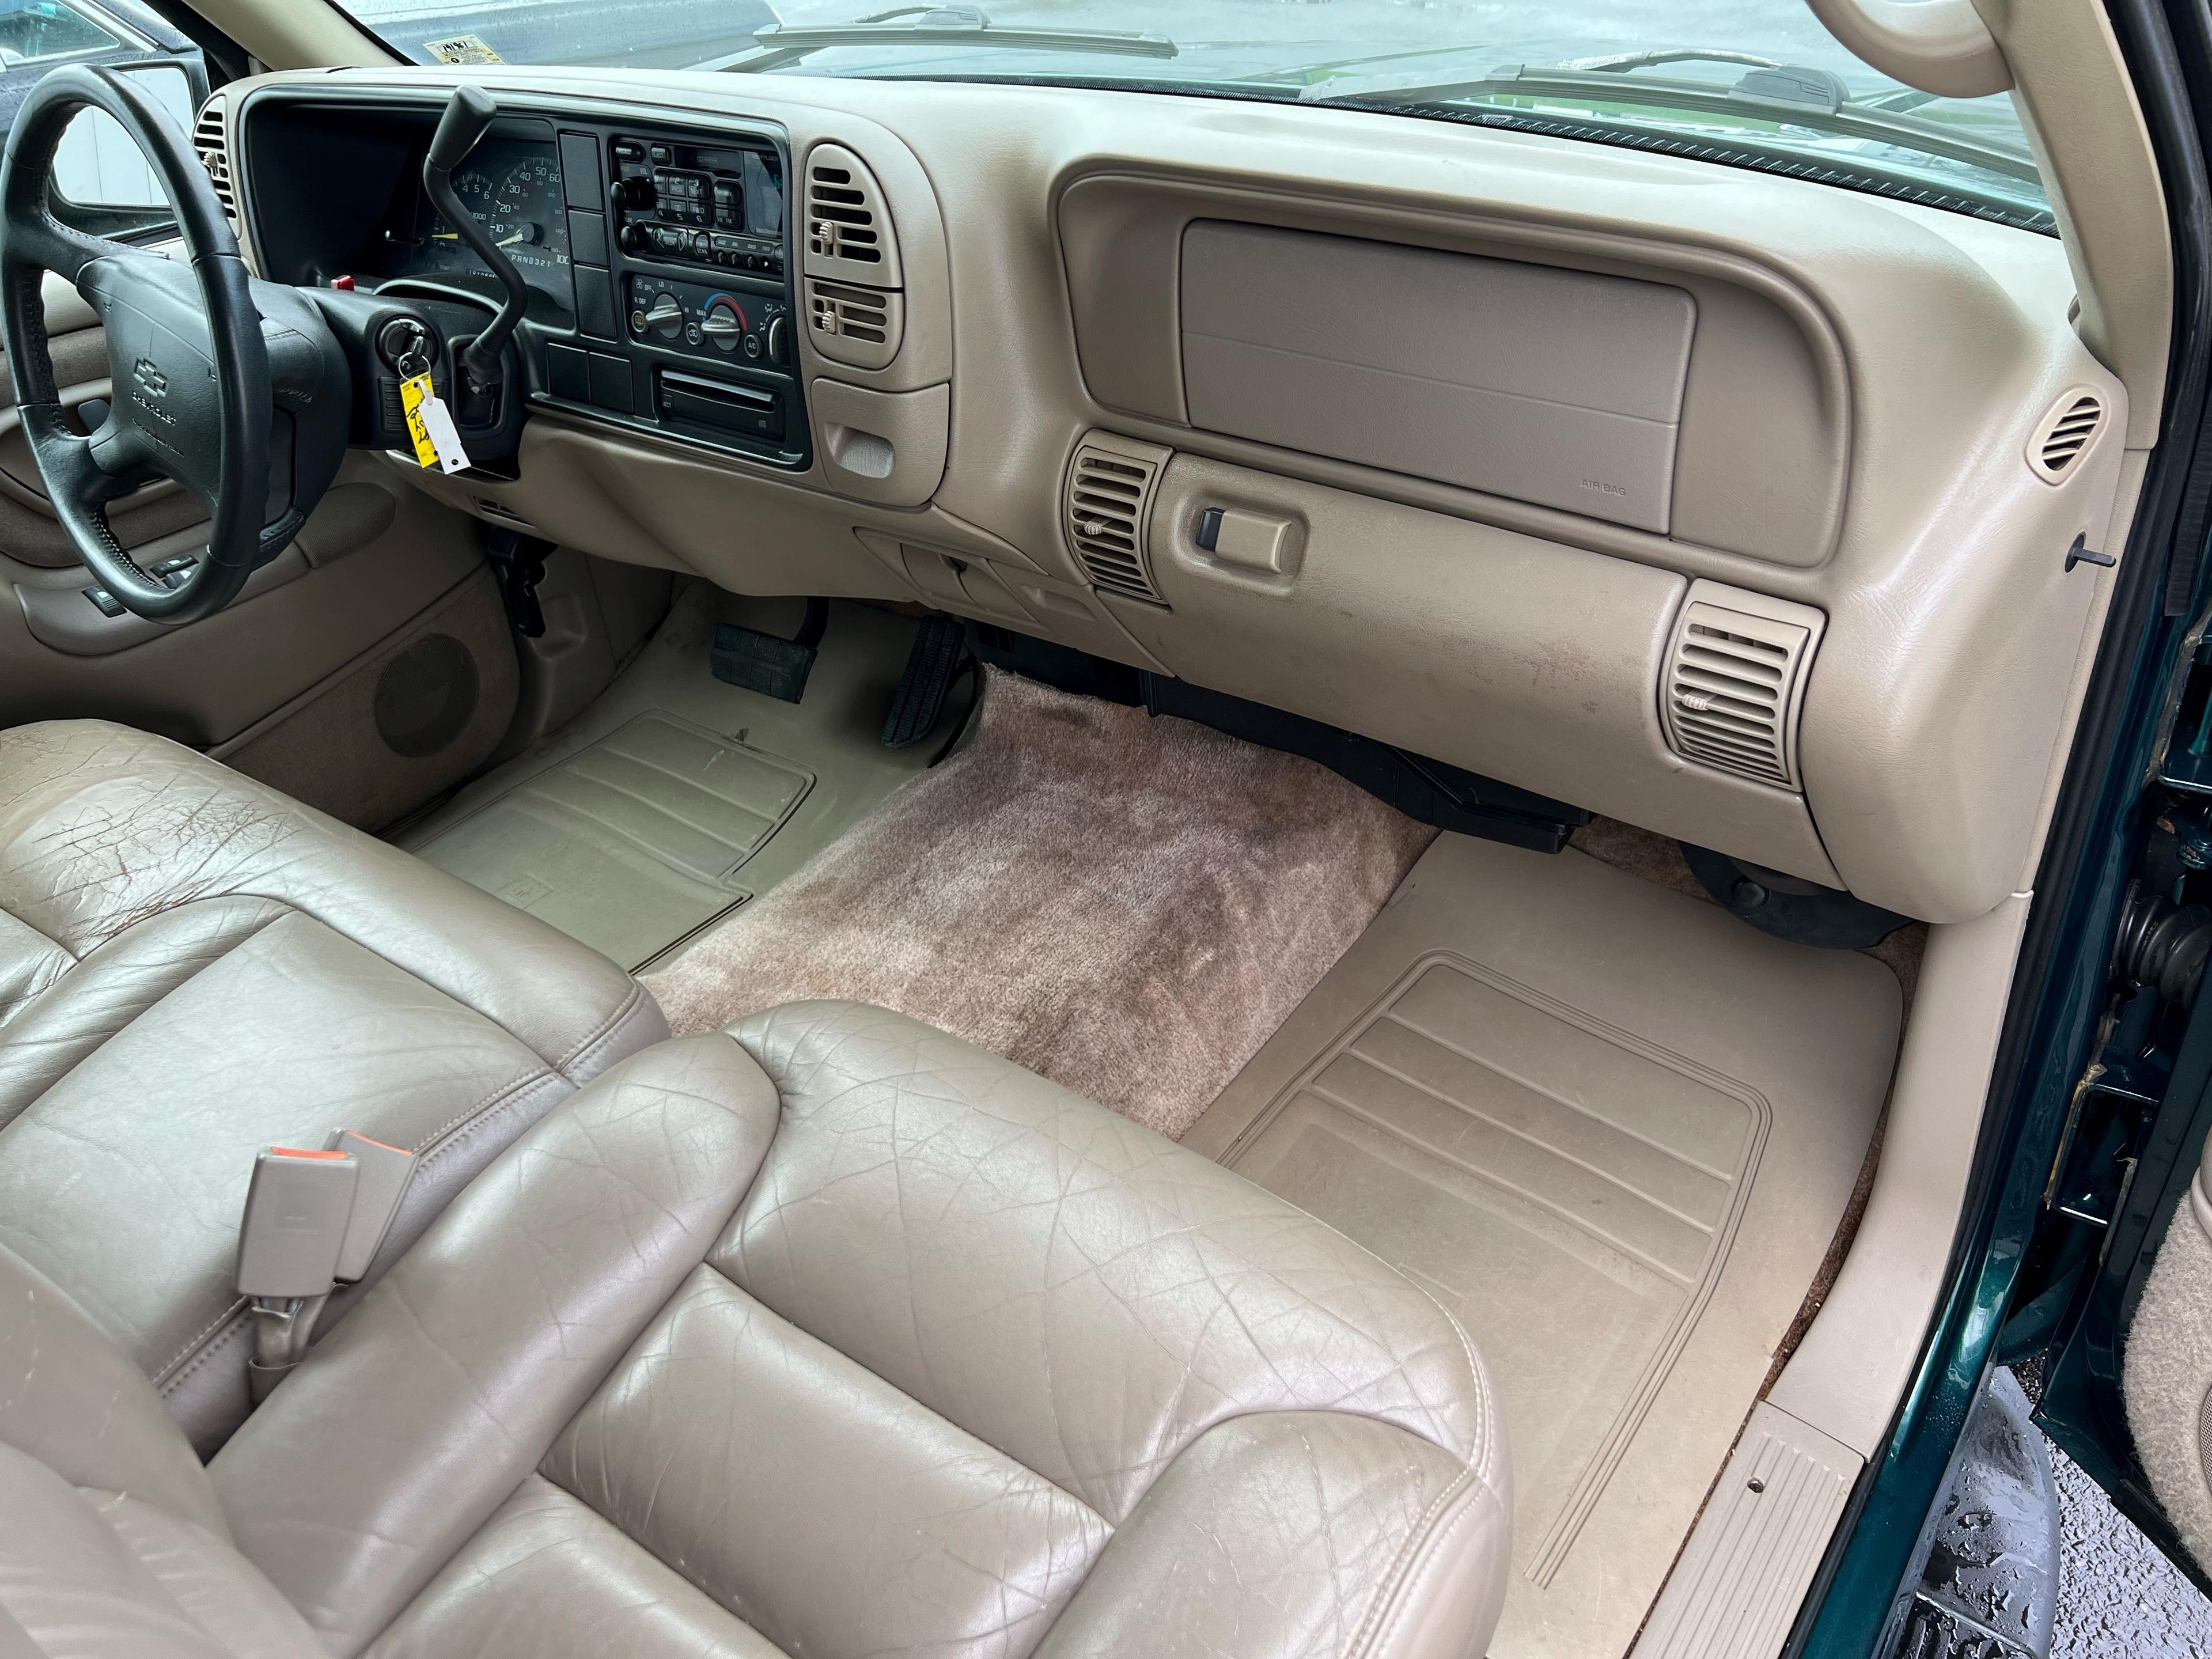 1997 Chevrolet Tahoe LT SUV. 5.7 Liter 8 Cylinder. Automatic. Air Condition